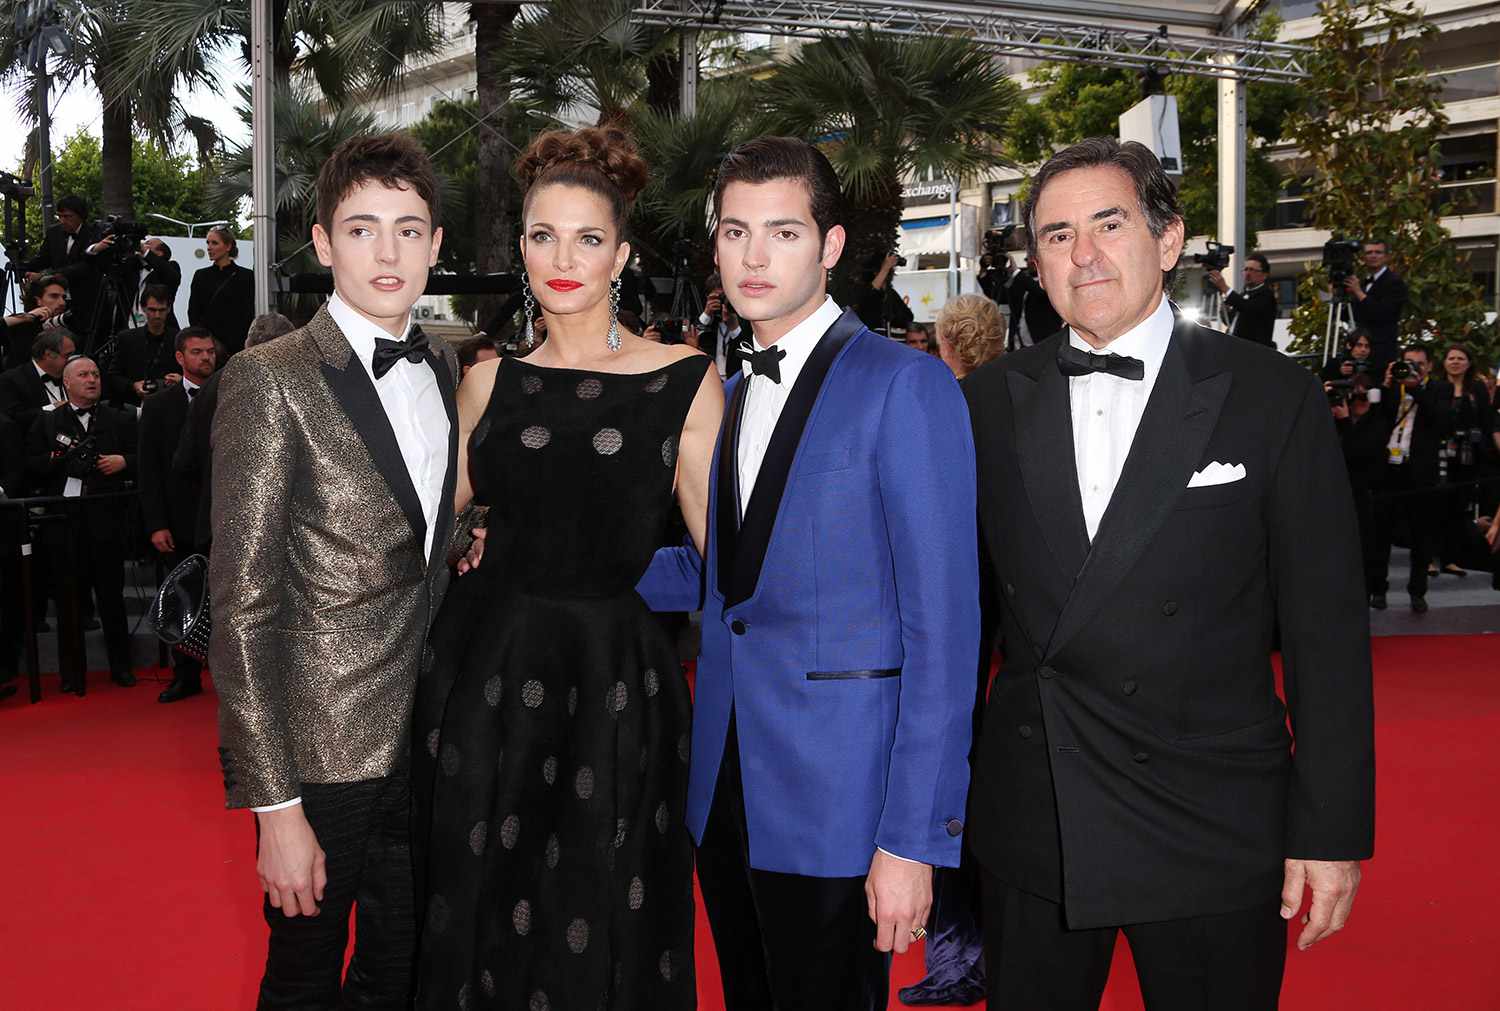 Stephanie Seymour and Peter Brant son